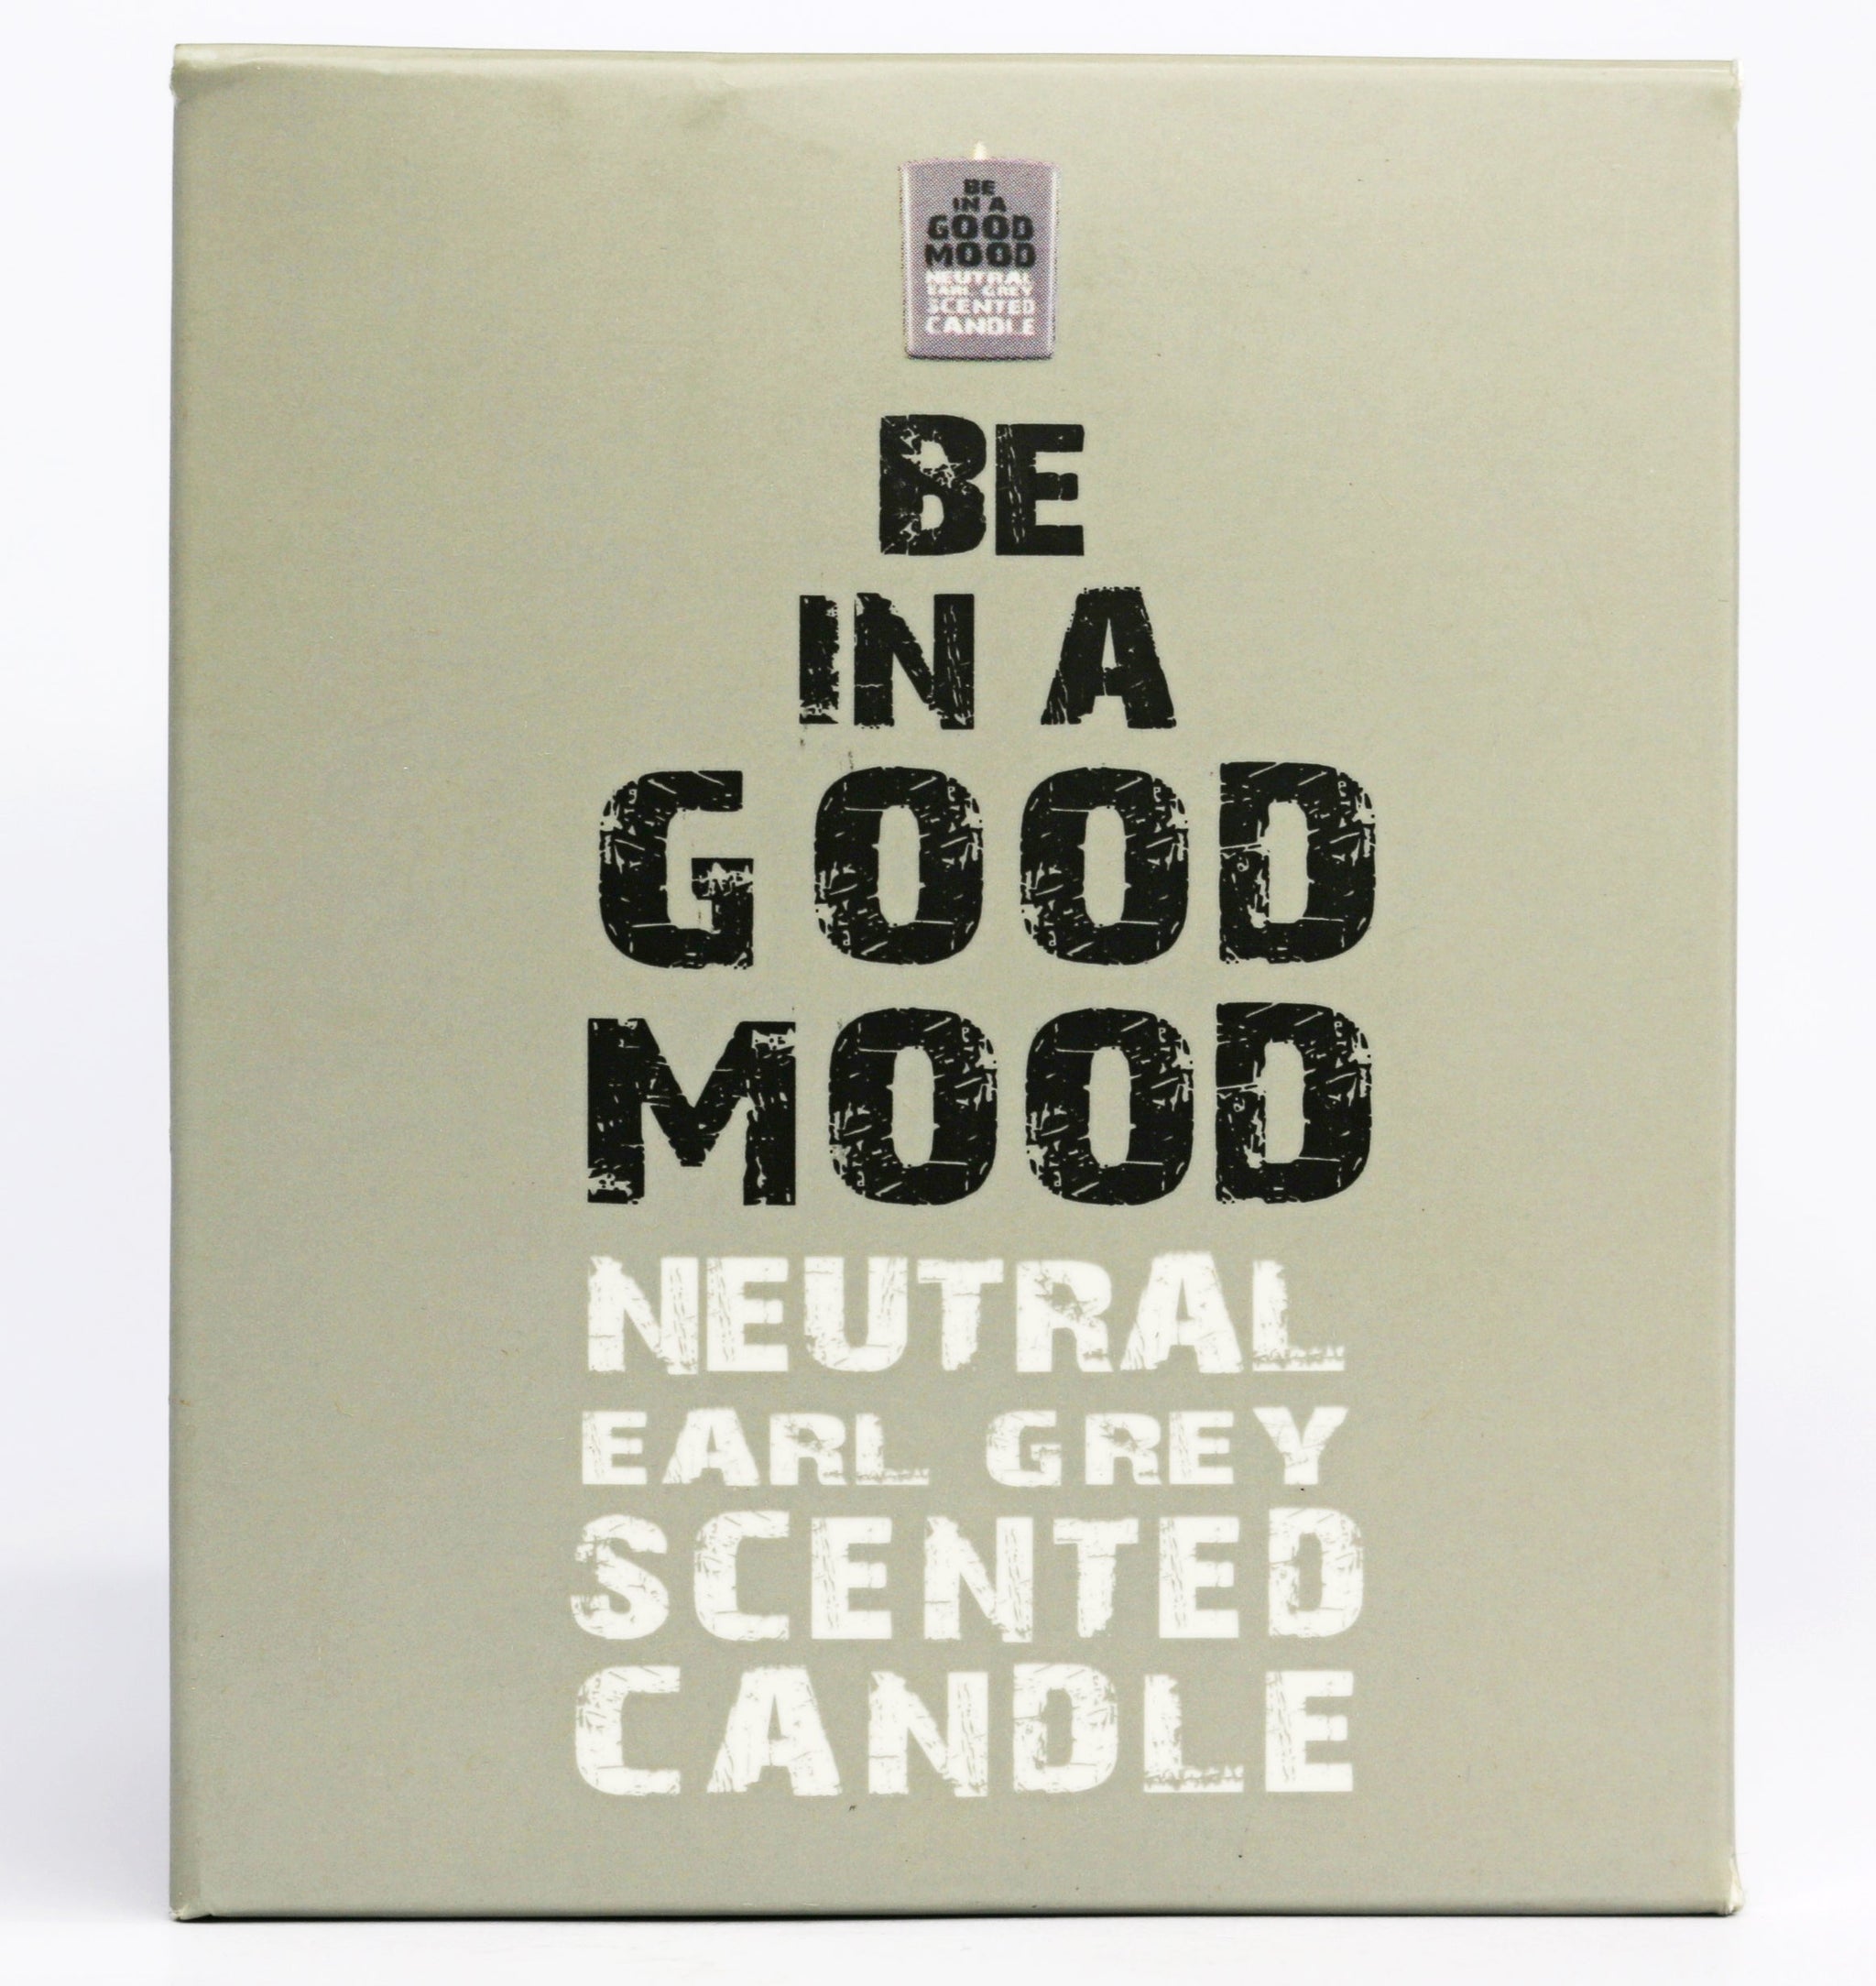 Be in a Good Mood Neutral Earl Grey Scented Candle